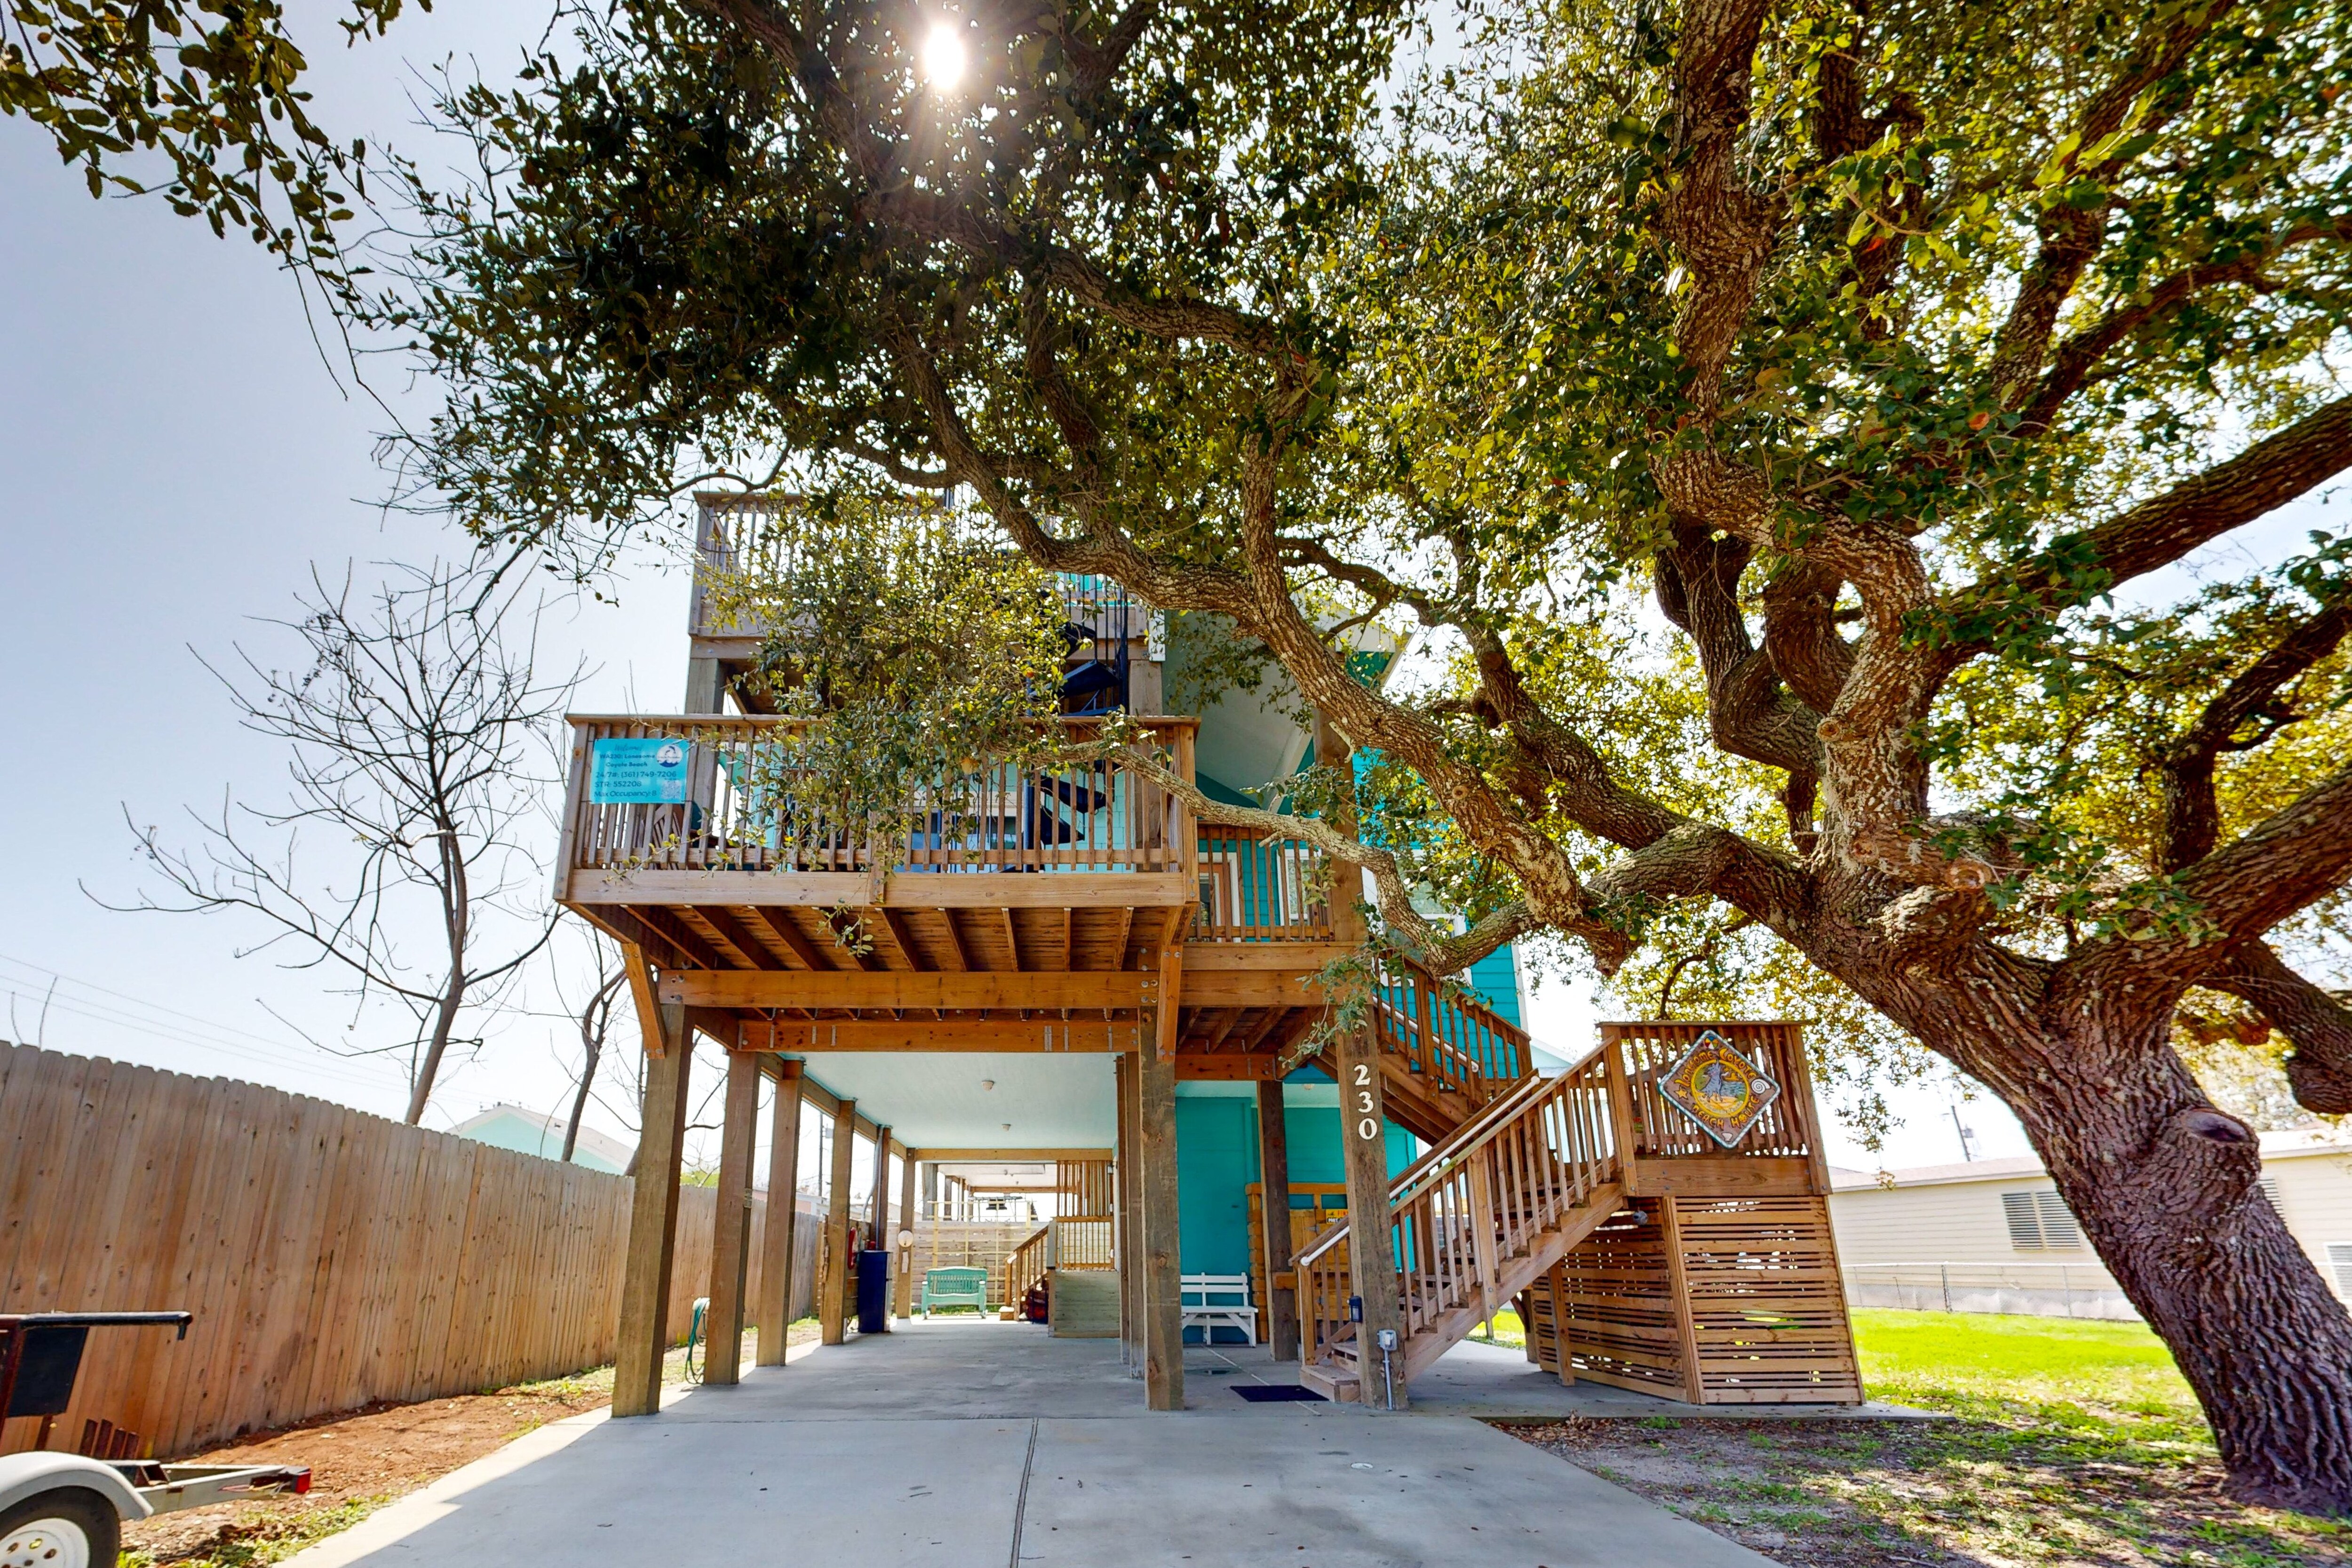 Majestic oak trees provide a private and shady entrance to the property.